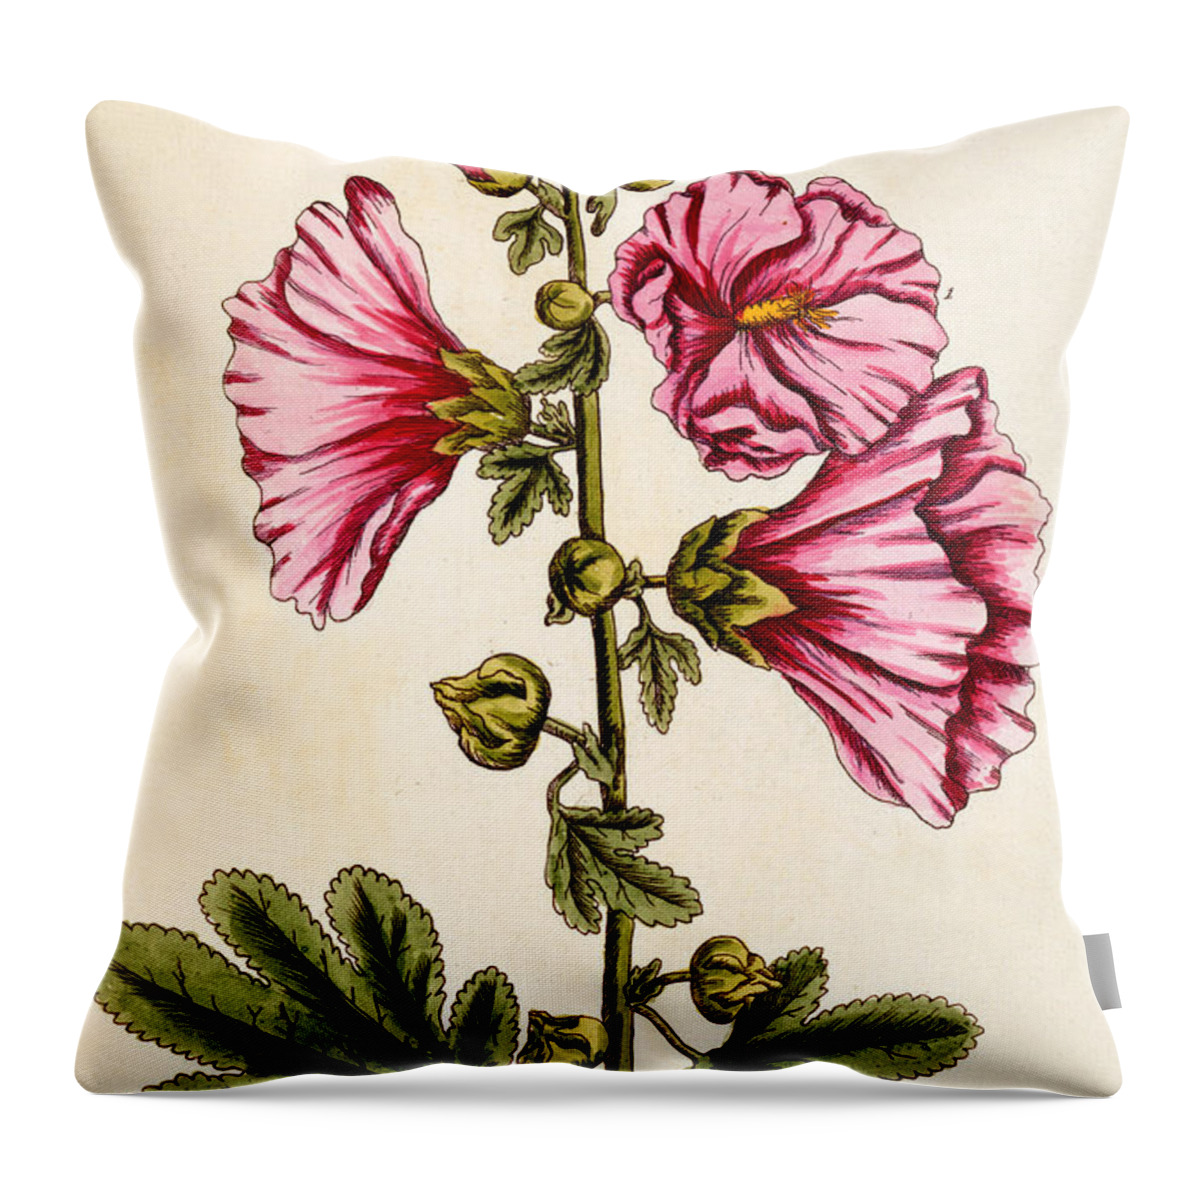 Still-life Throw Pillow featuring the painting Hollyhocks by Elizabeth Blackwell